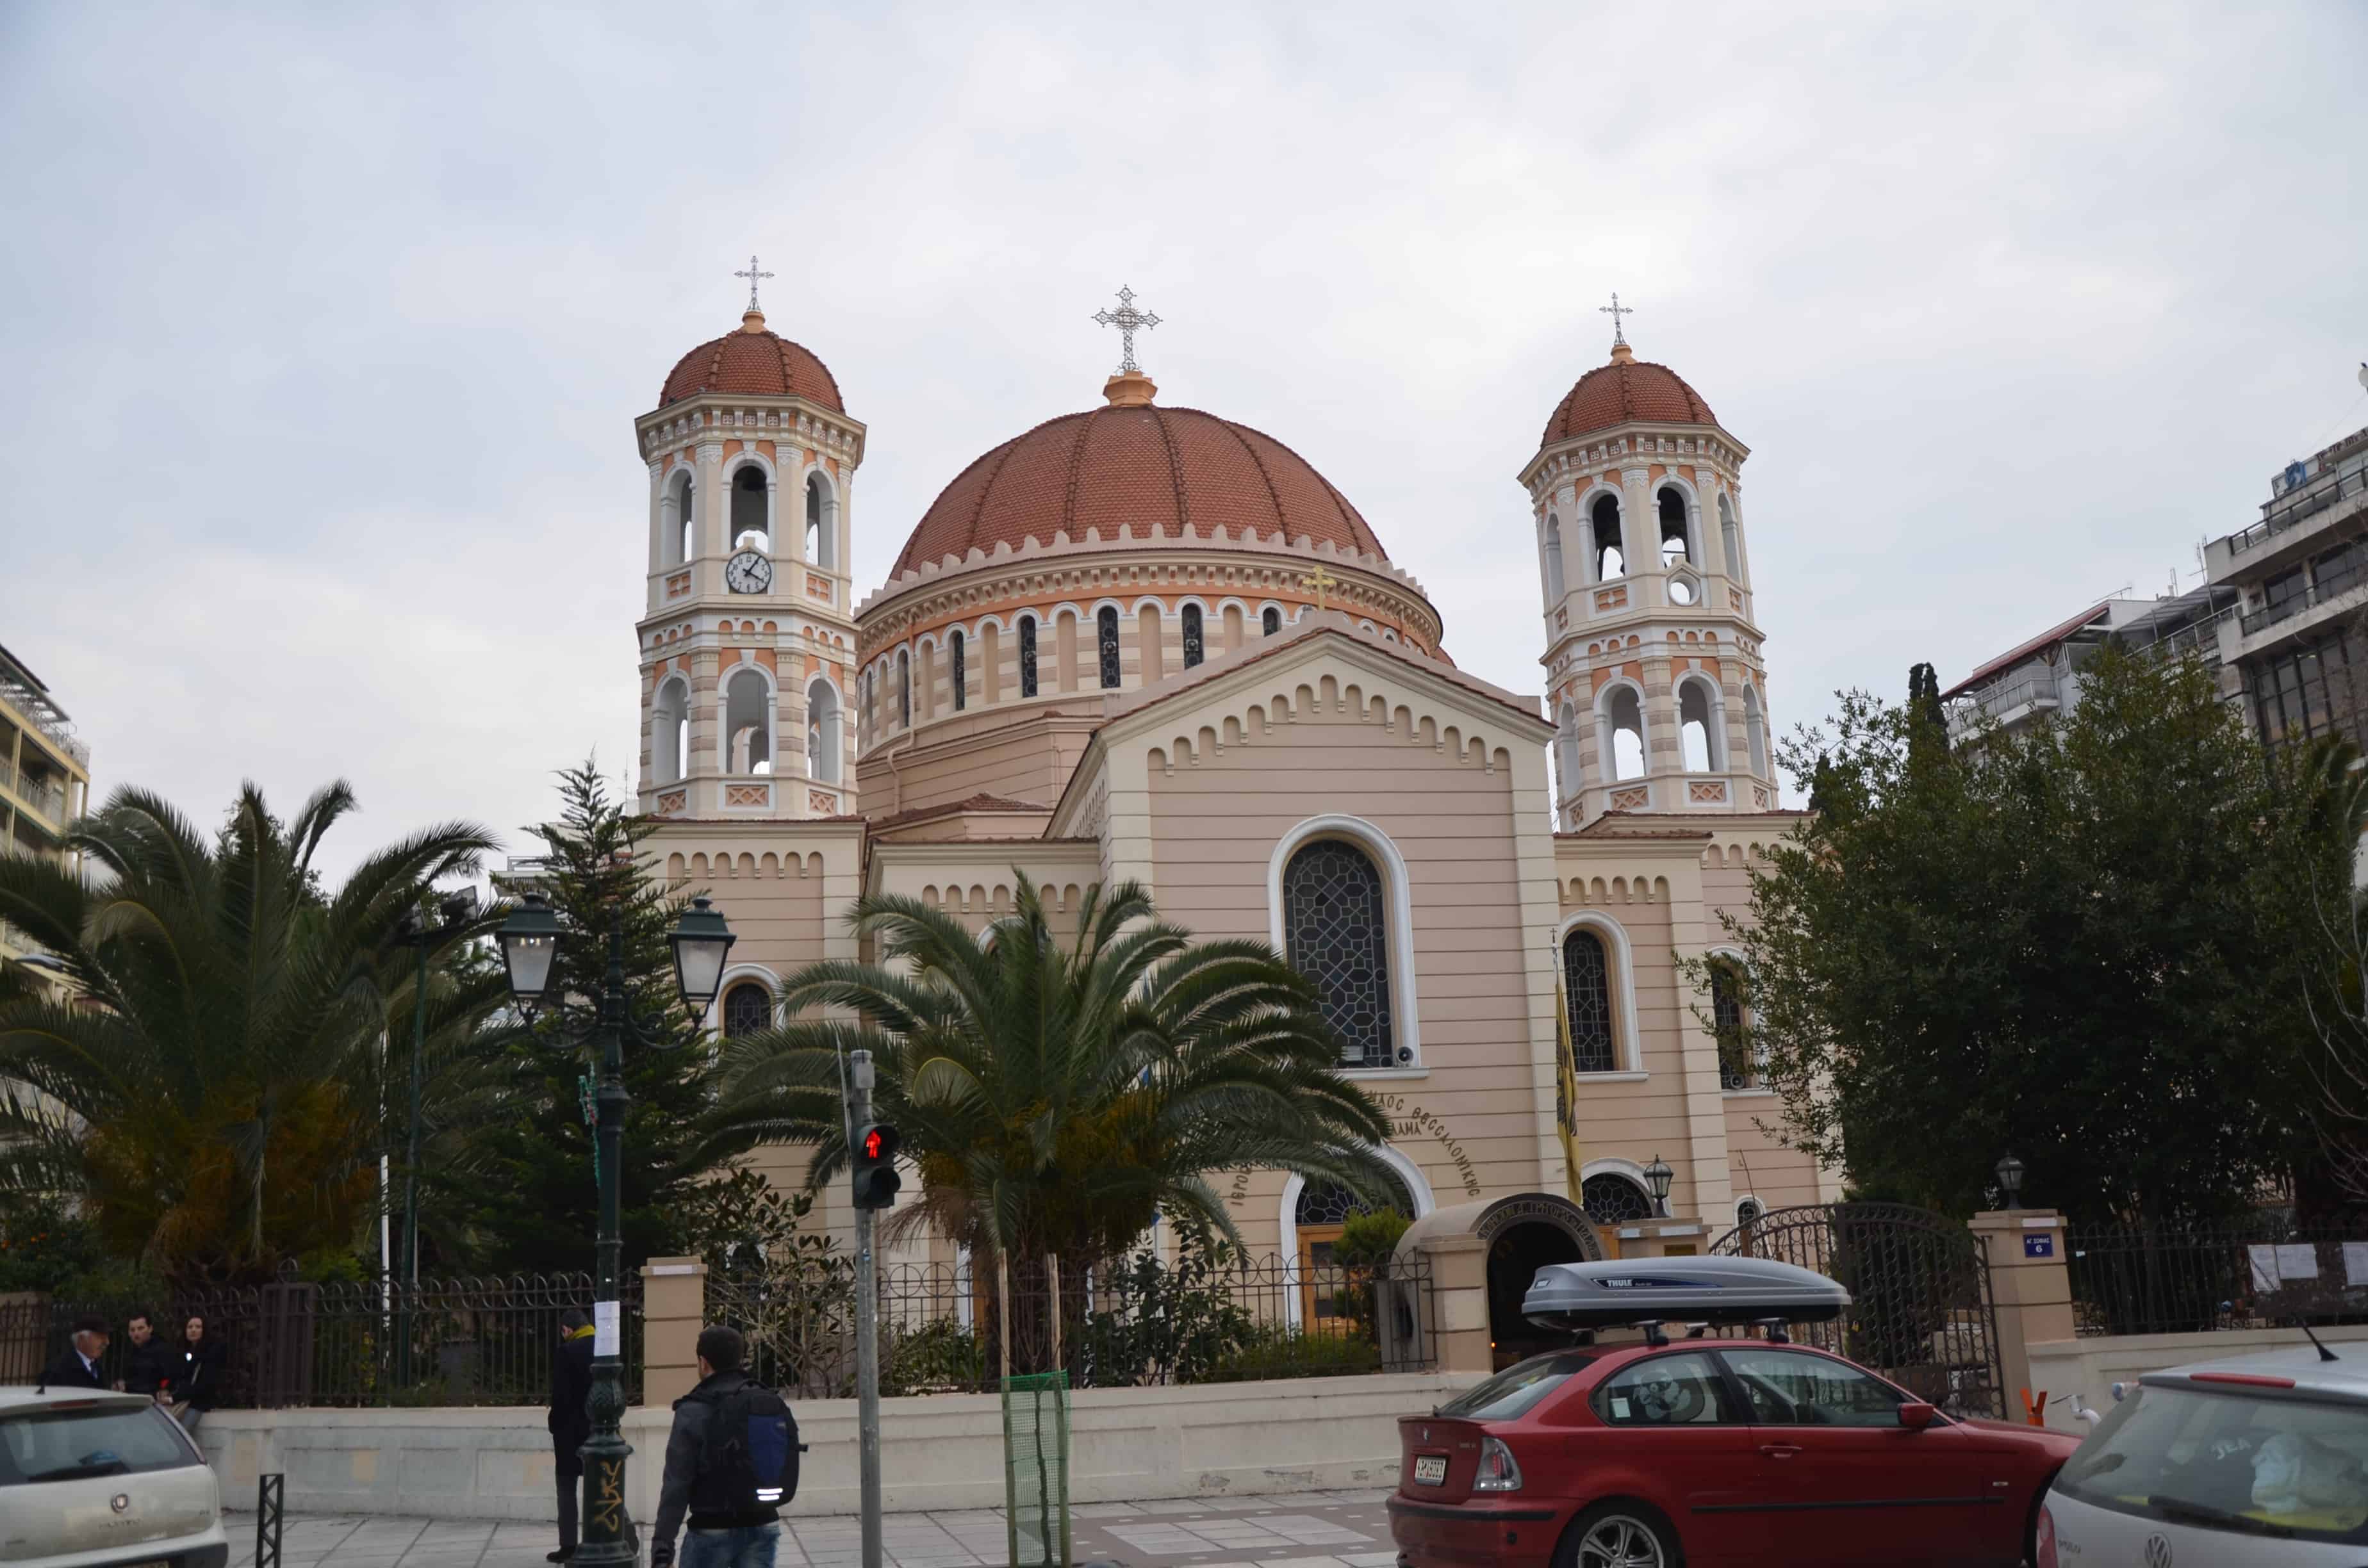 Metropolitan Cathedral of St. Gregory Palamas in Thessaloniki, Greece